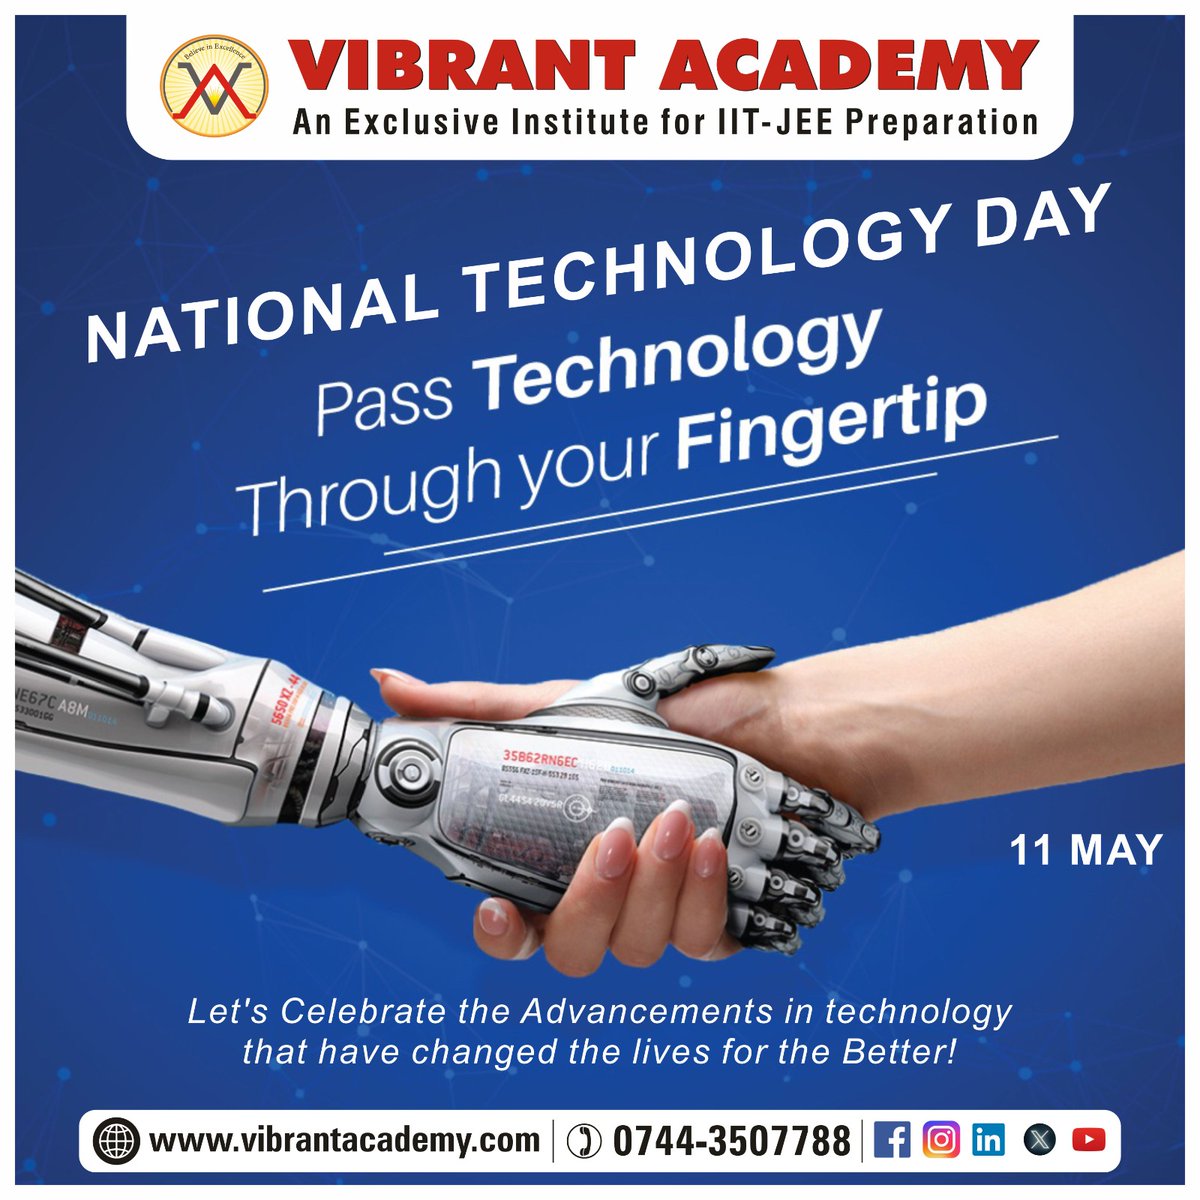 On National Technology Day, salute the hardwork and tenacity of our scientists and those passionate about technology.

#NationalTechnologyDay  #vibrantacademy  #kotacoaching #iitjee #jeemains #JEEADVANCED